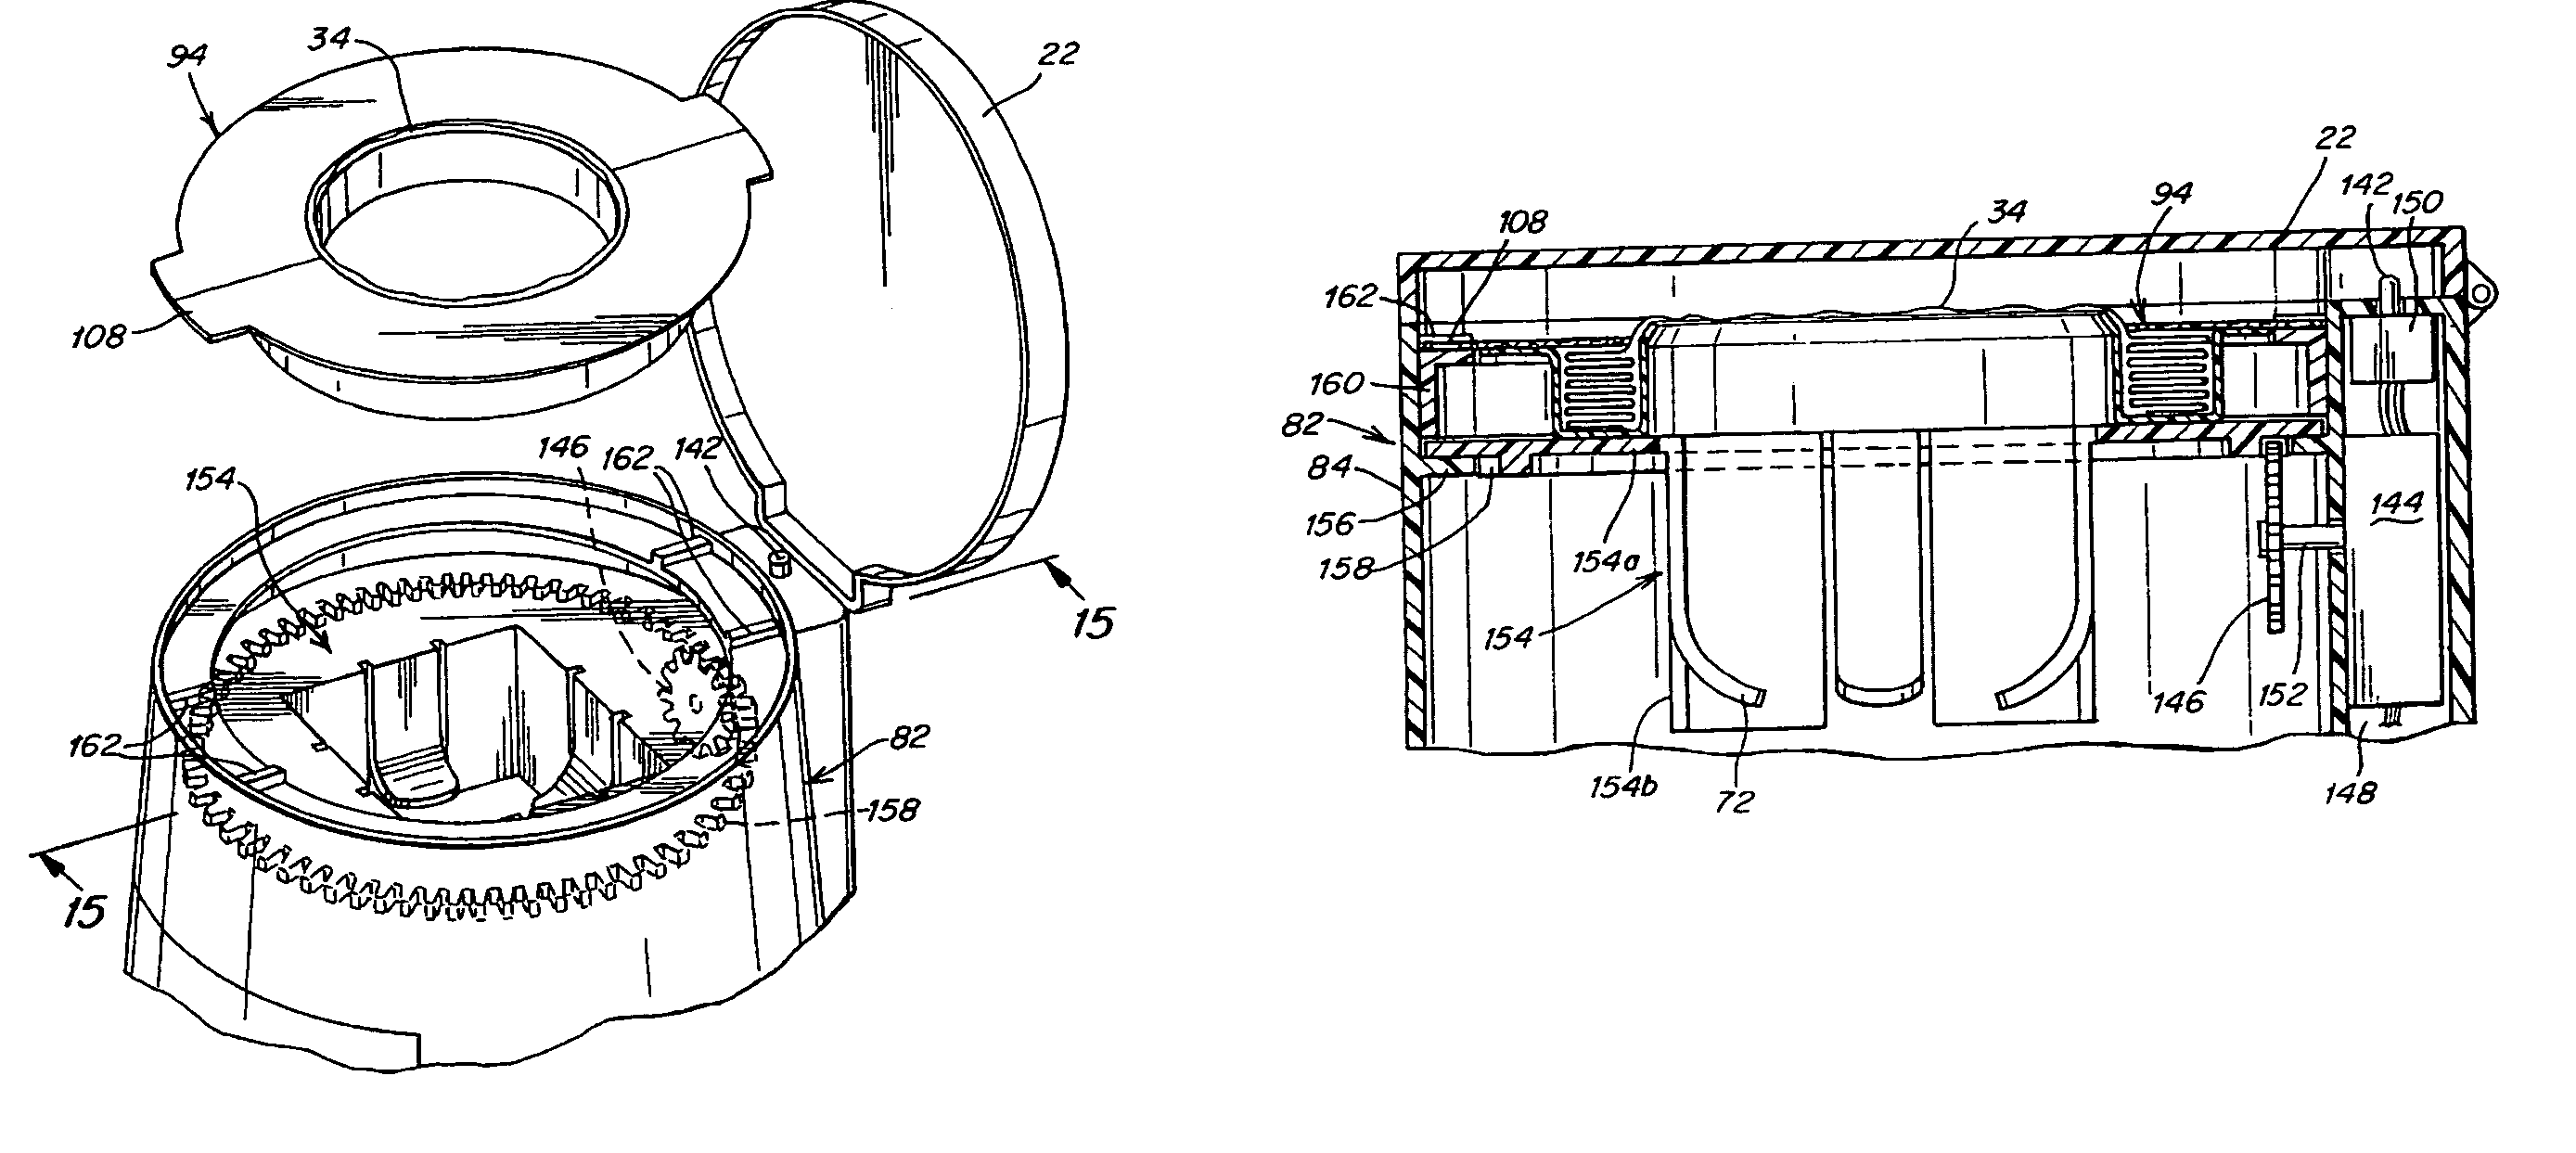 Waste disposal device including a sensing mechanism for delaying the rotation of a cartridge